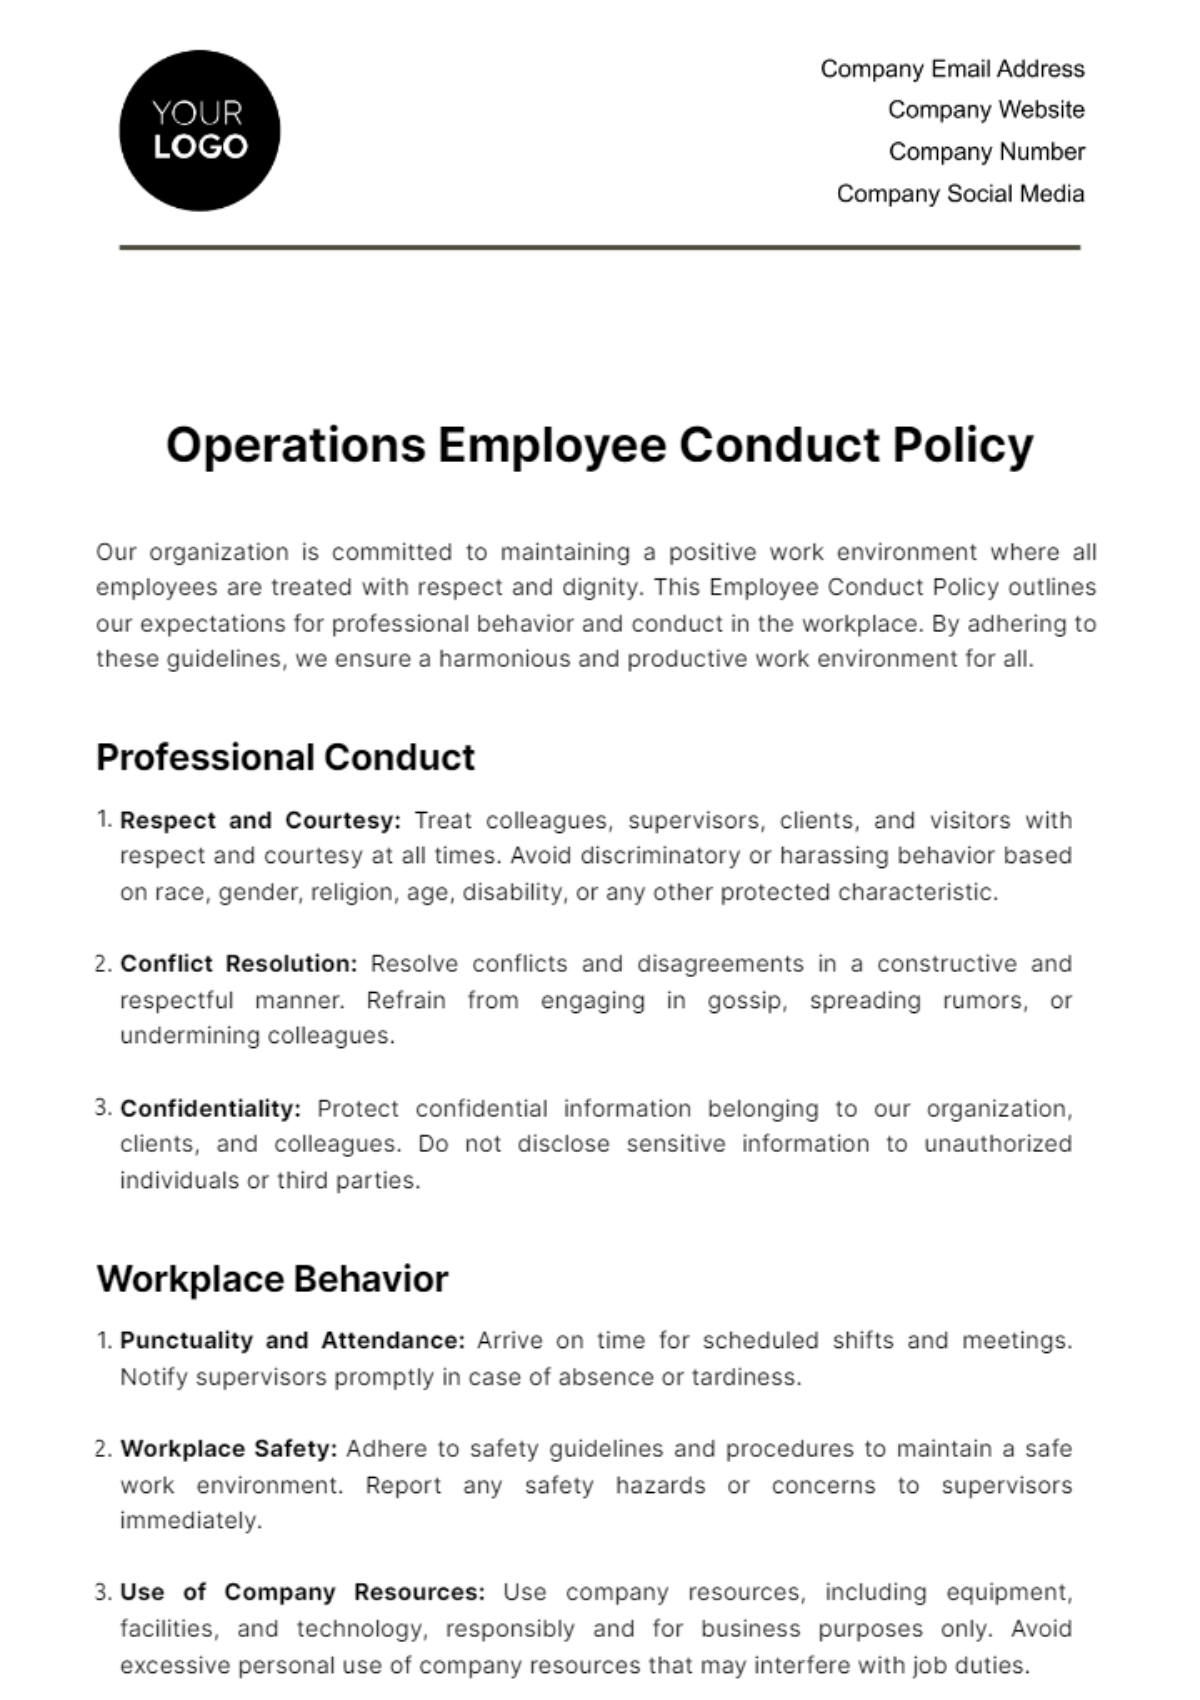 Operations Employee Conduct Policy Template